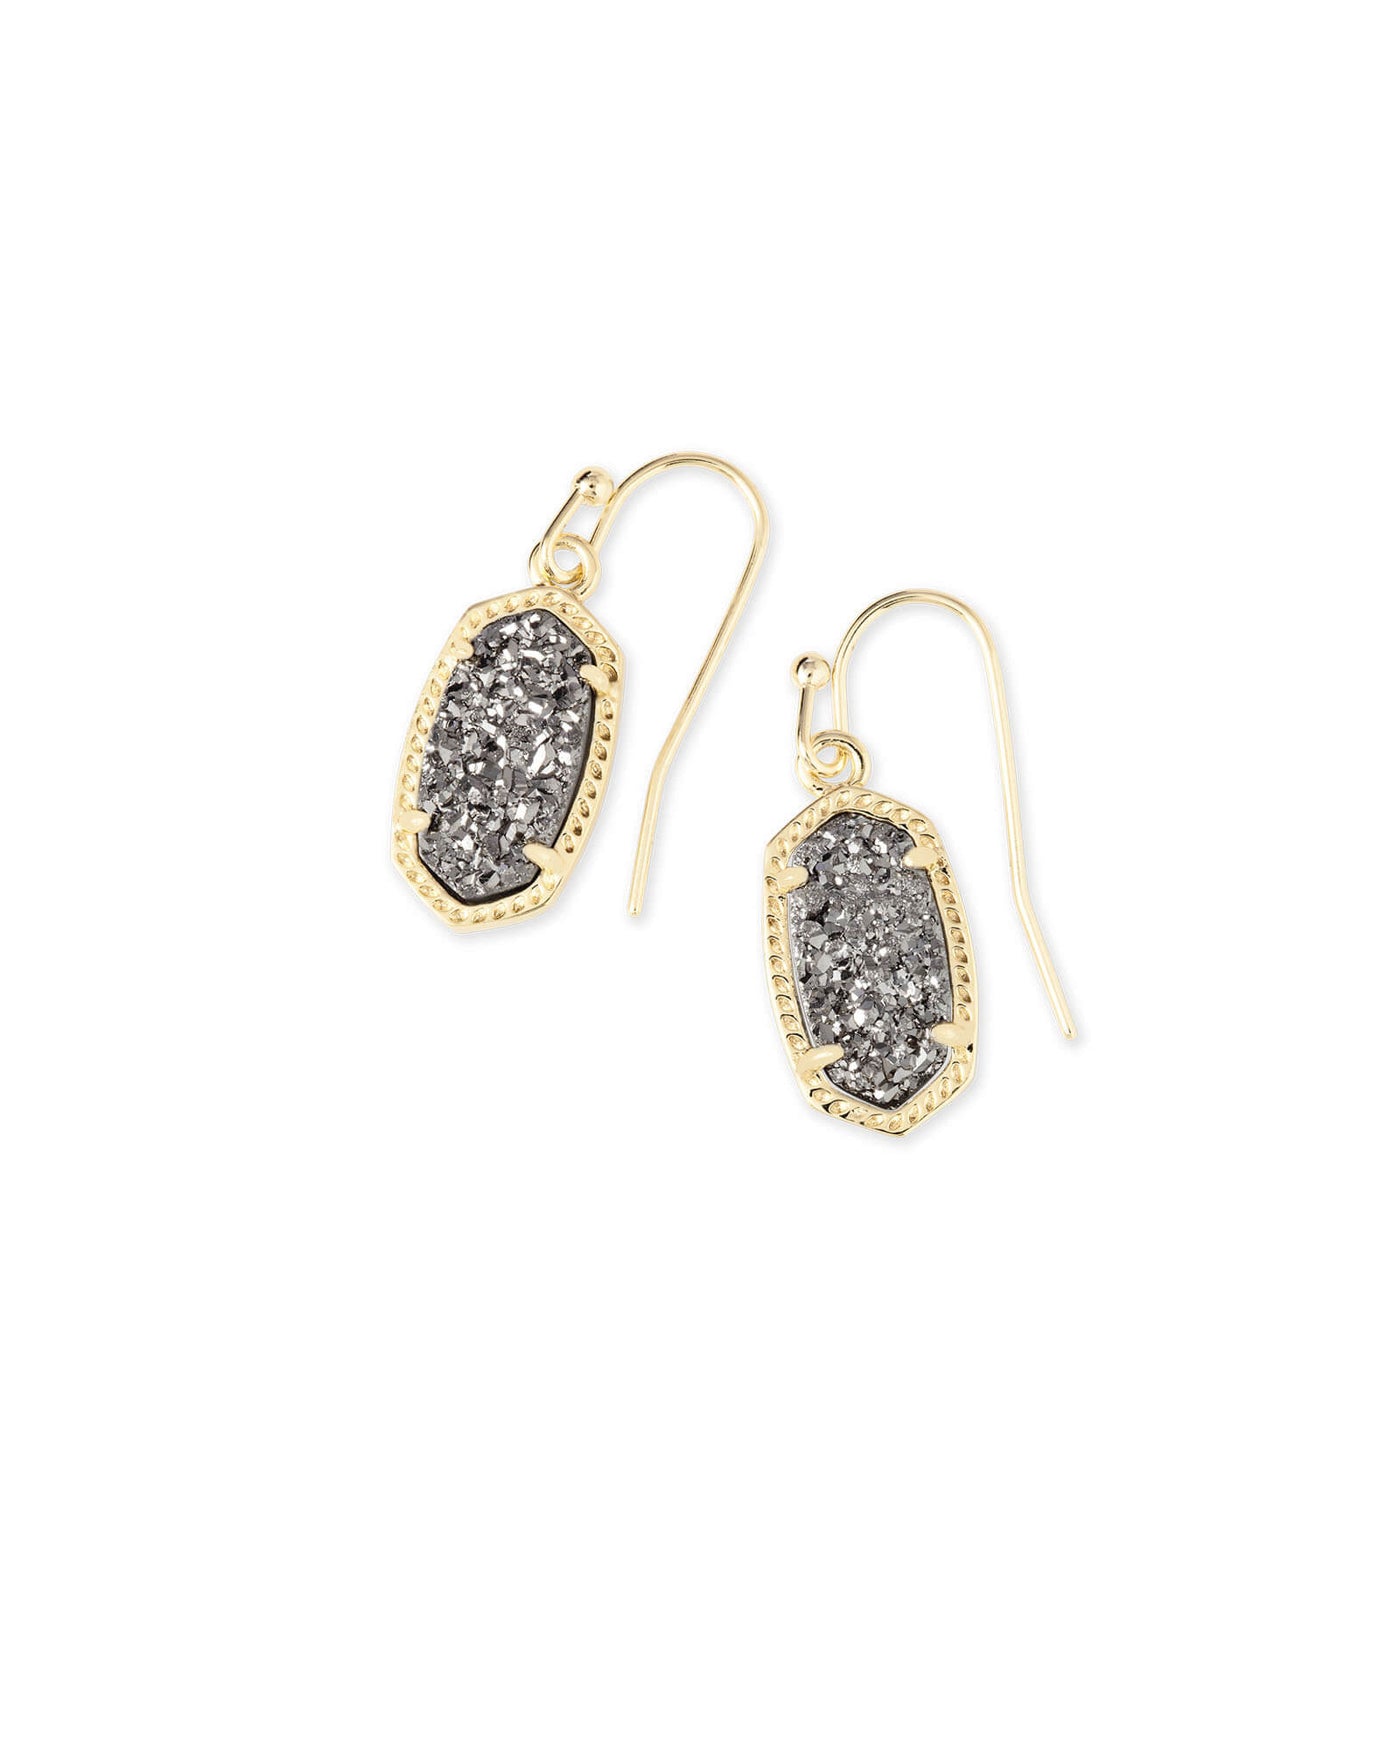 Lee Drop Earrings Gold Platinum Drusy on white background, front view.